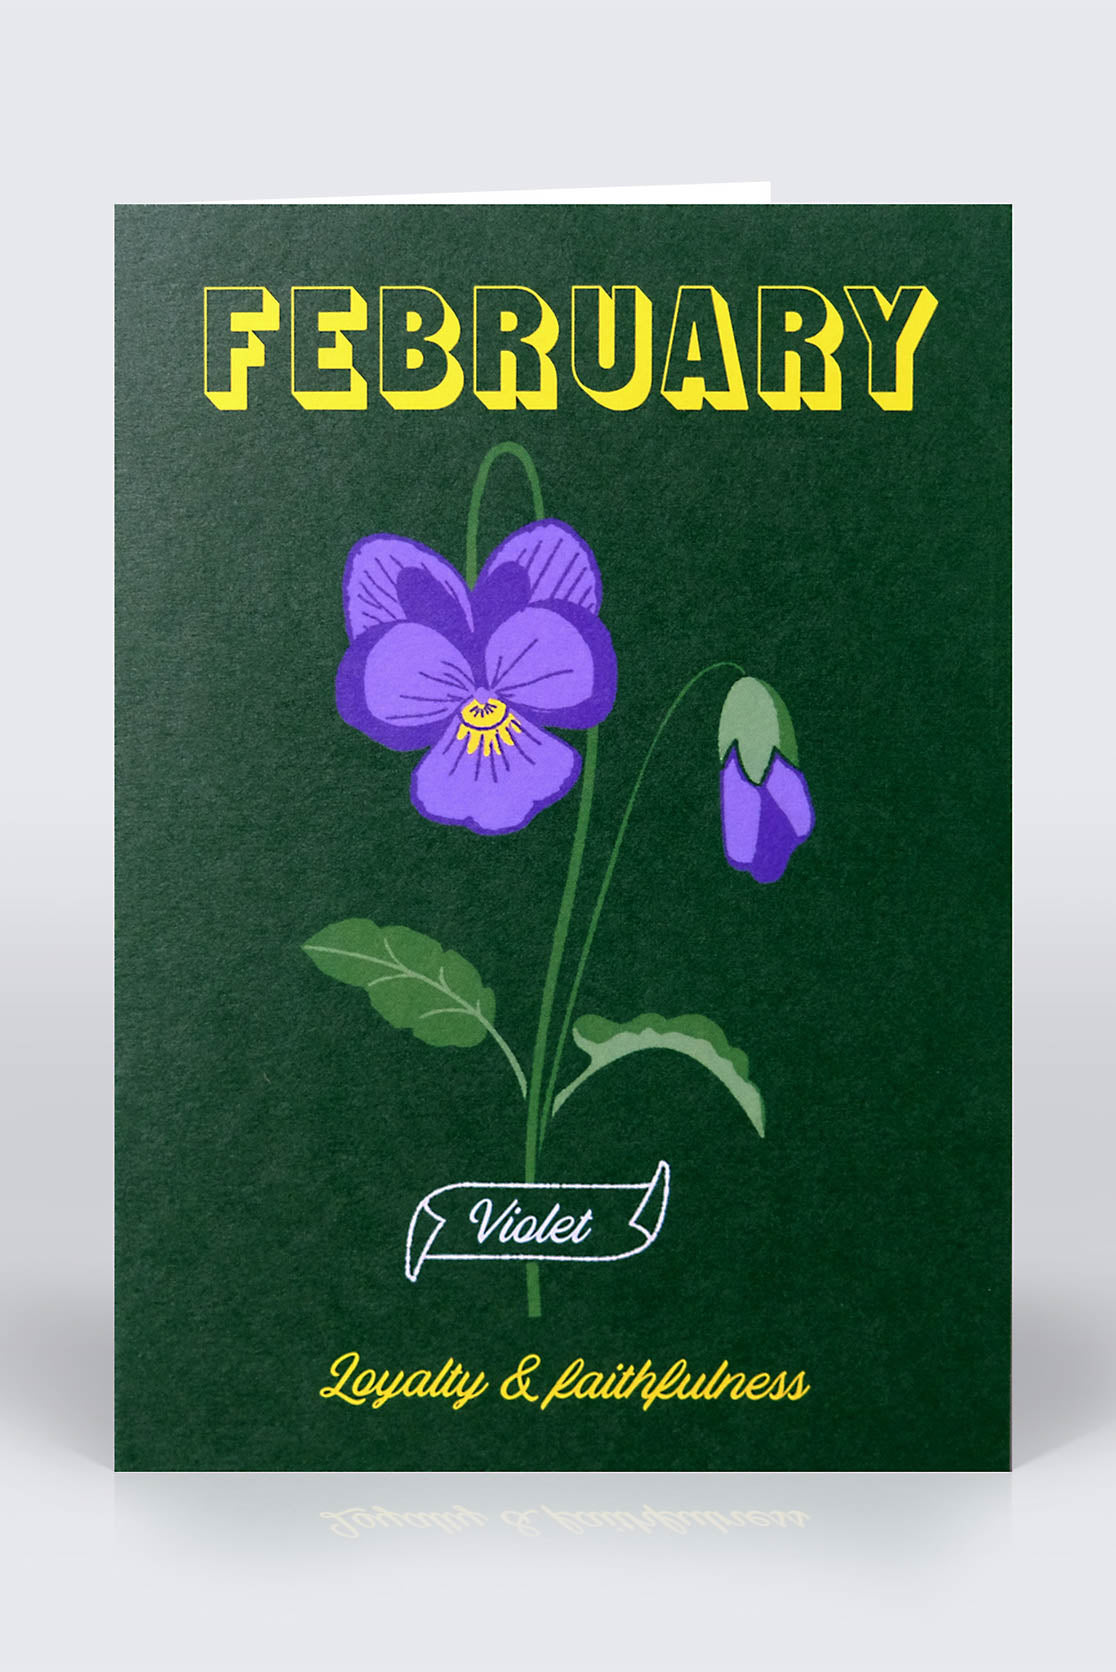 February birthday card with violets on front cover and dark green background